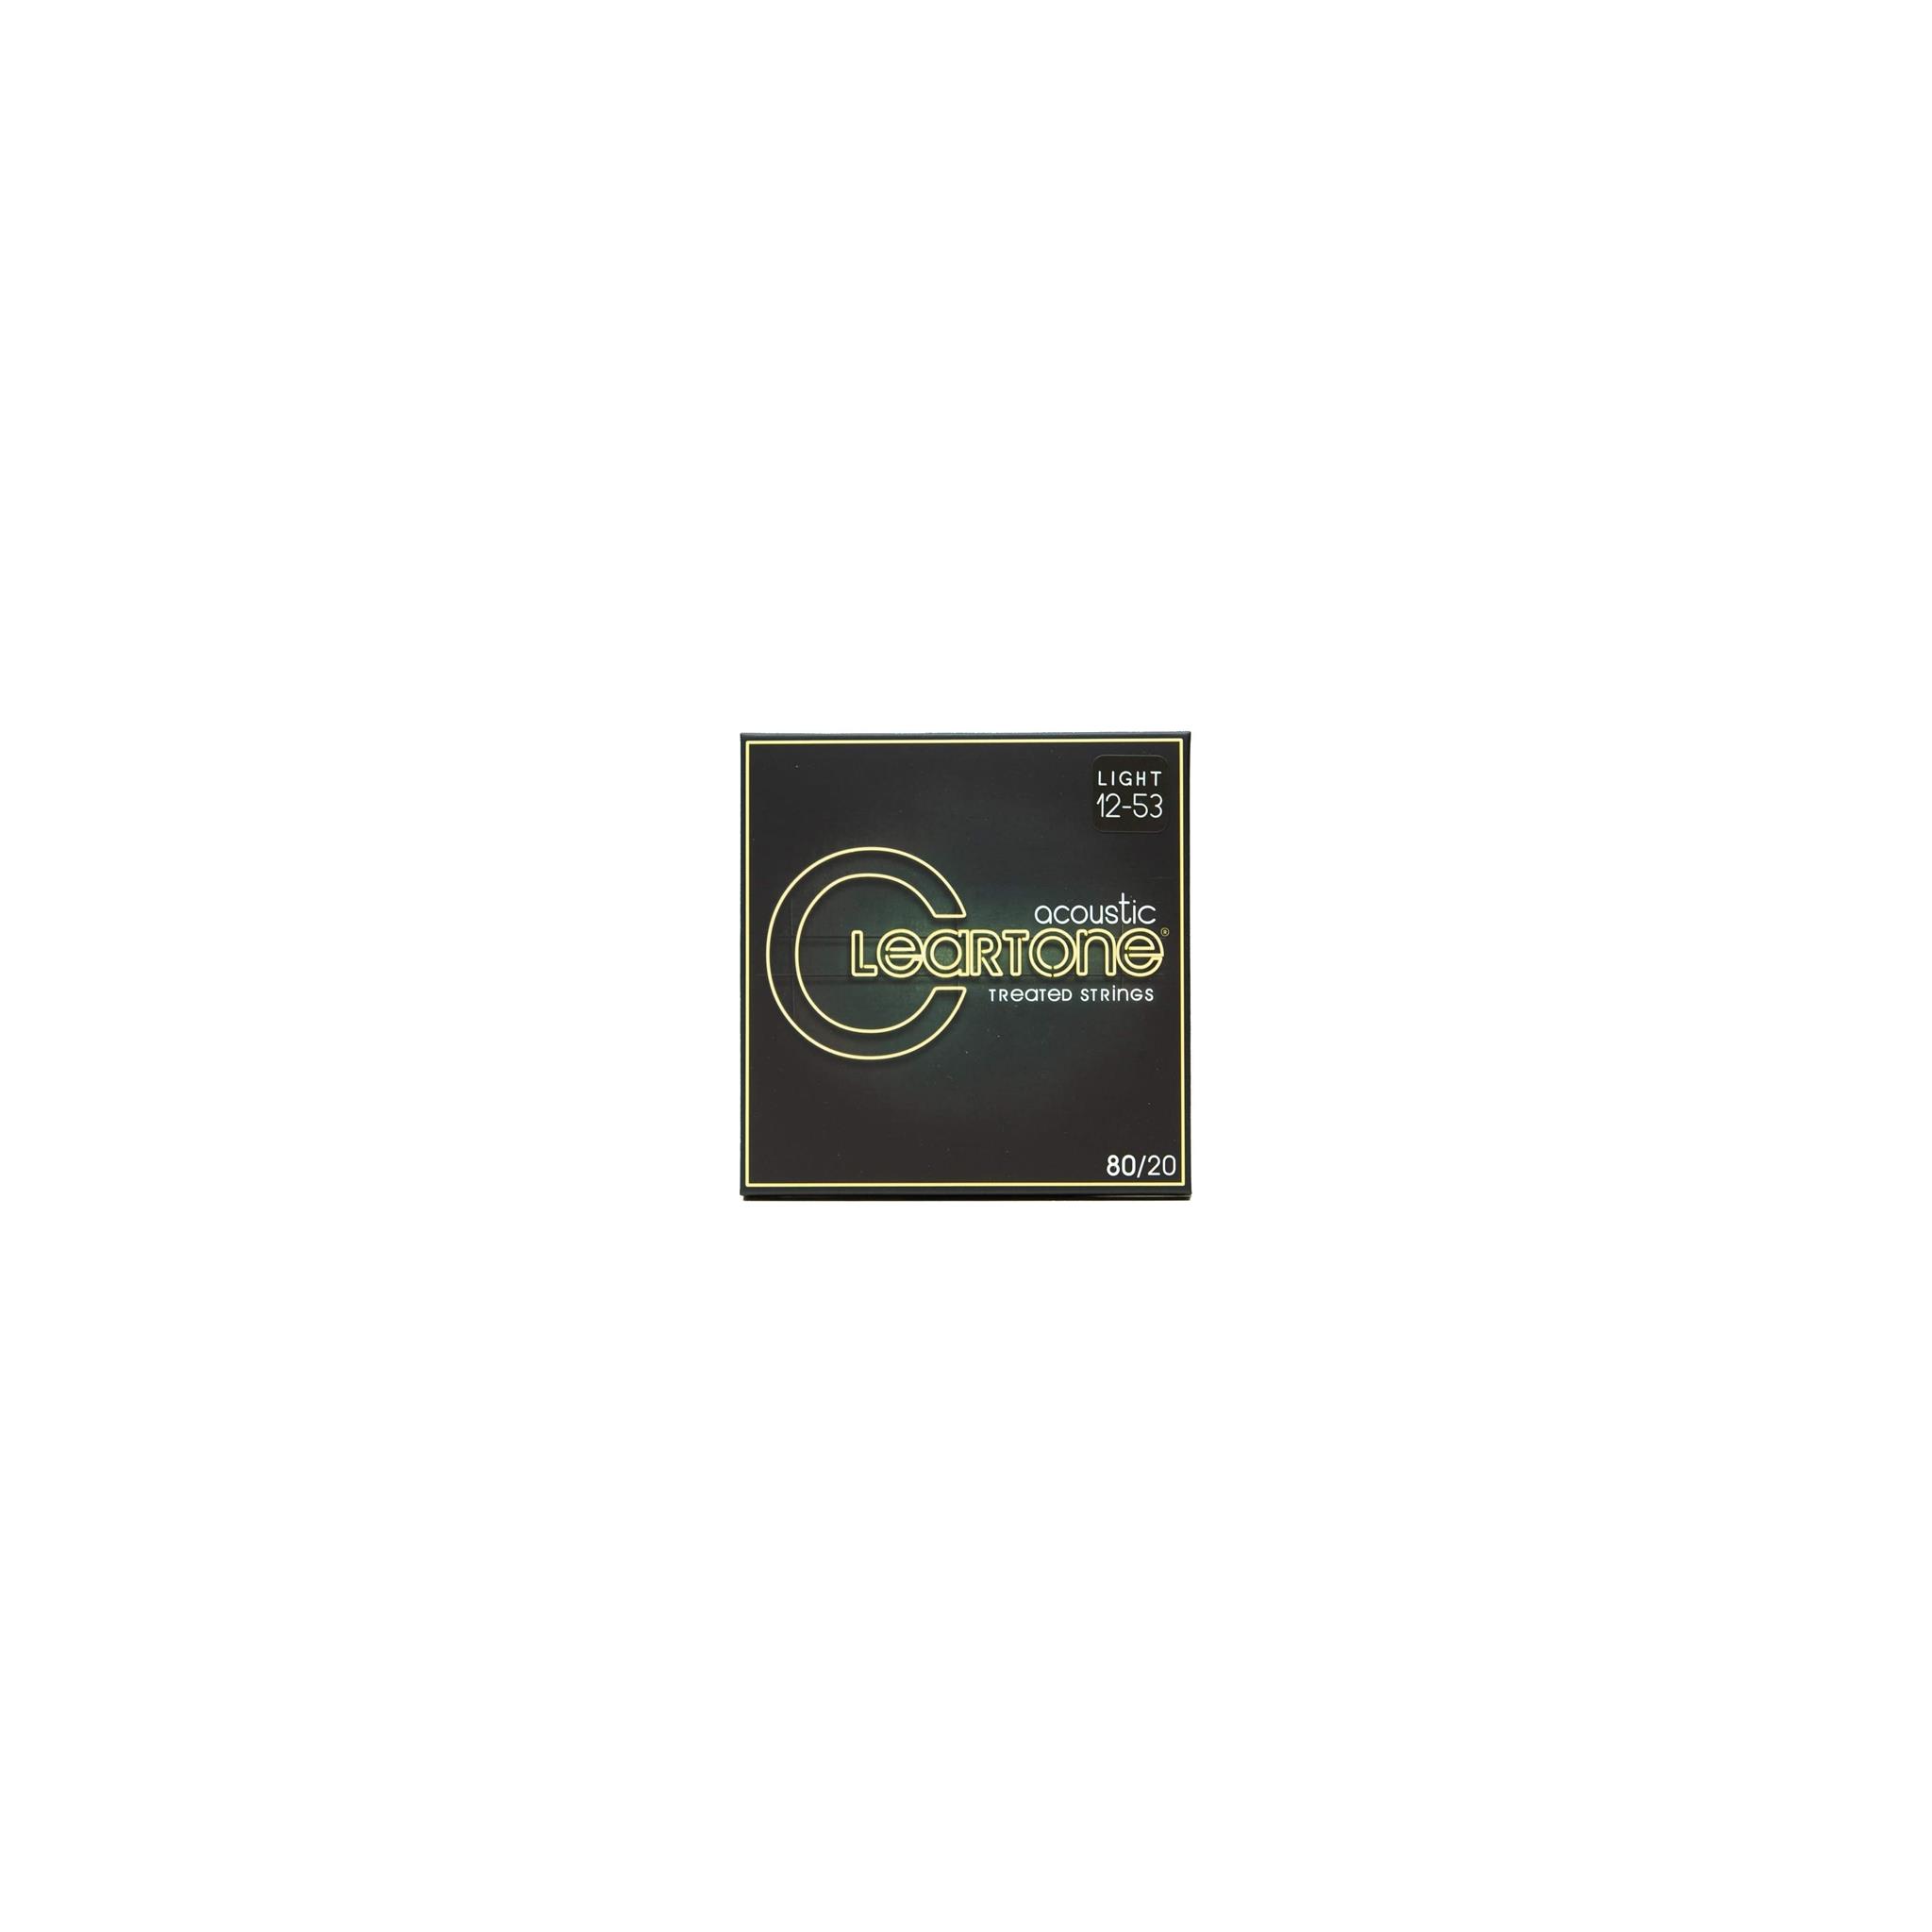 Cleartone GUITAR STRING 13-56